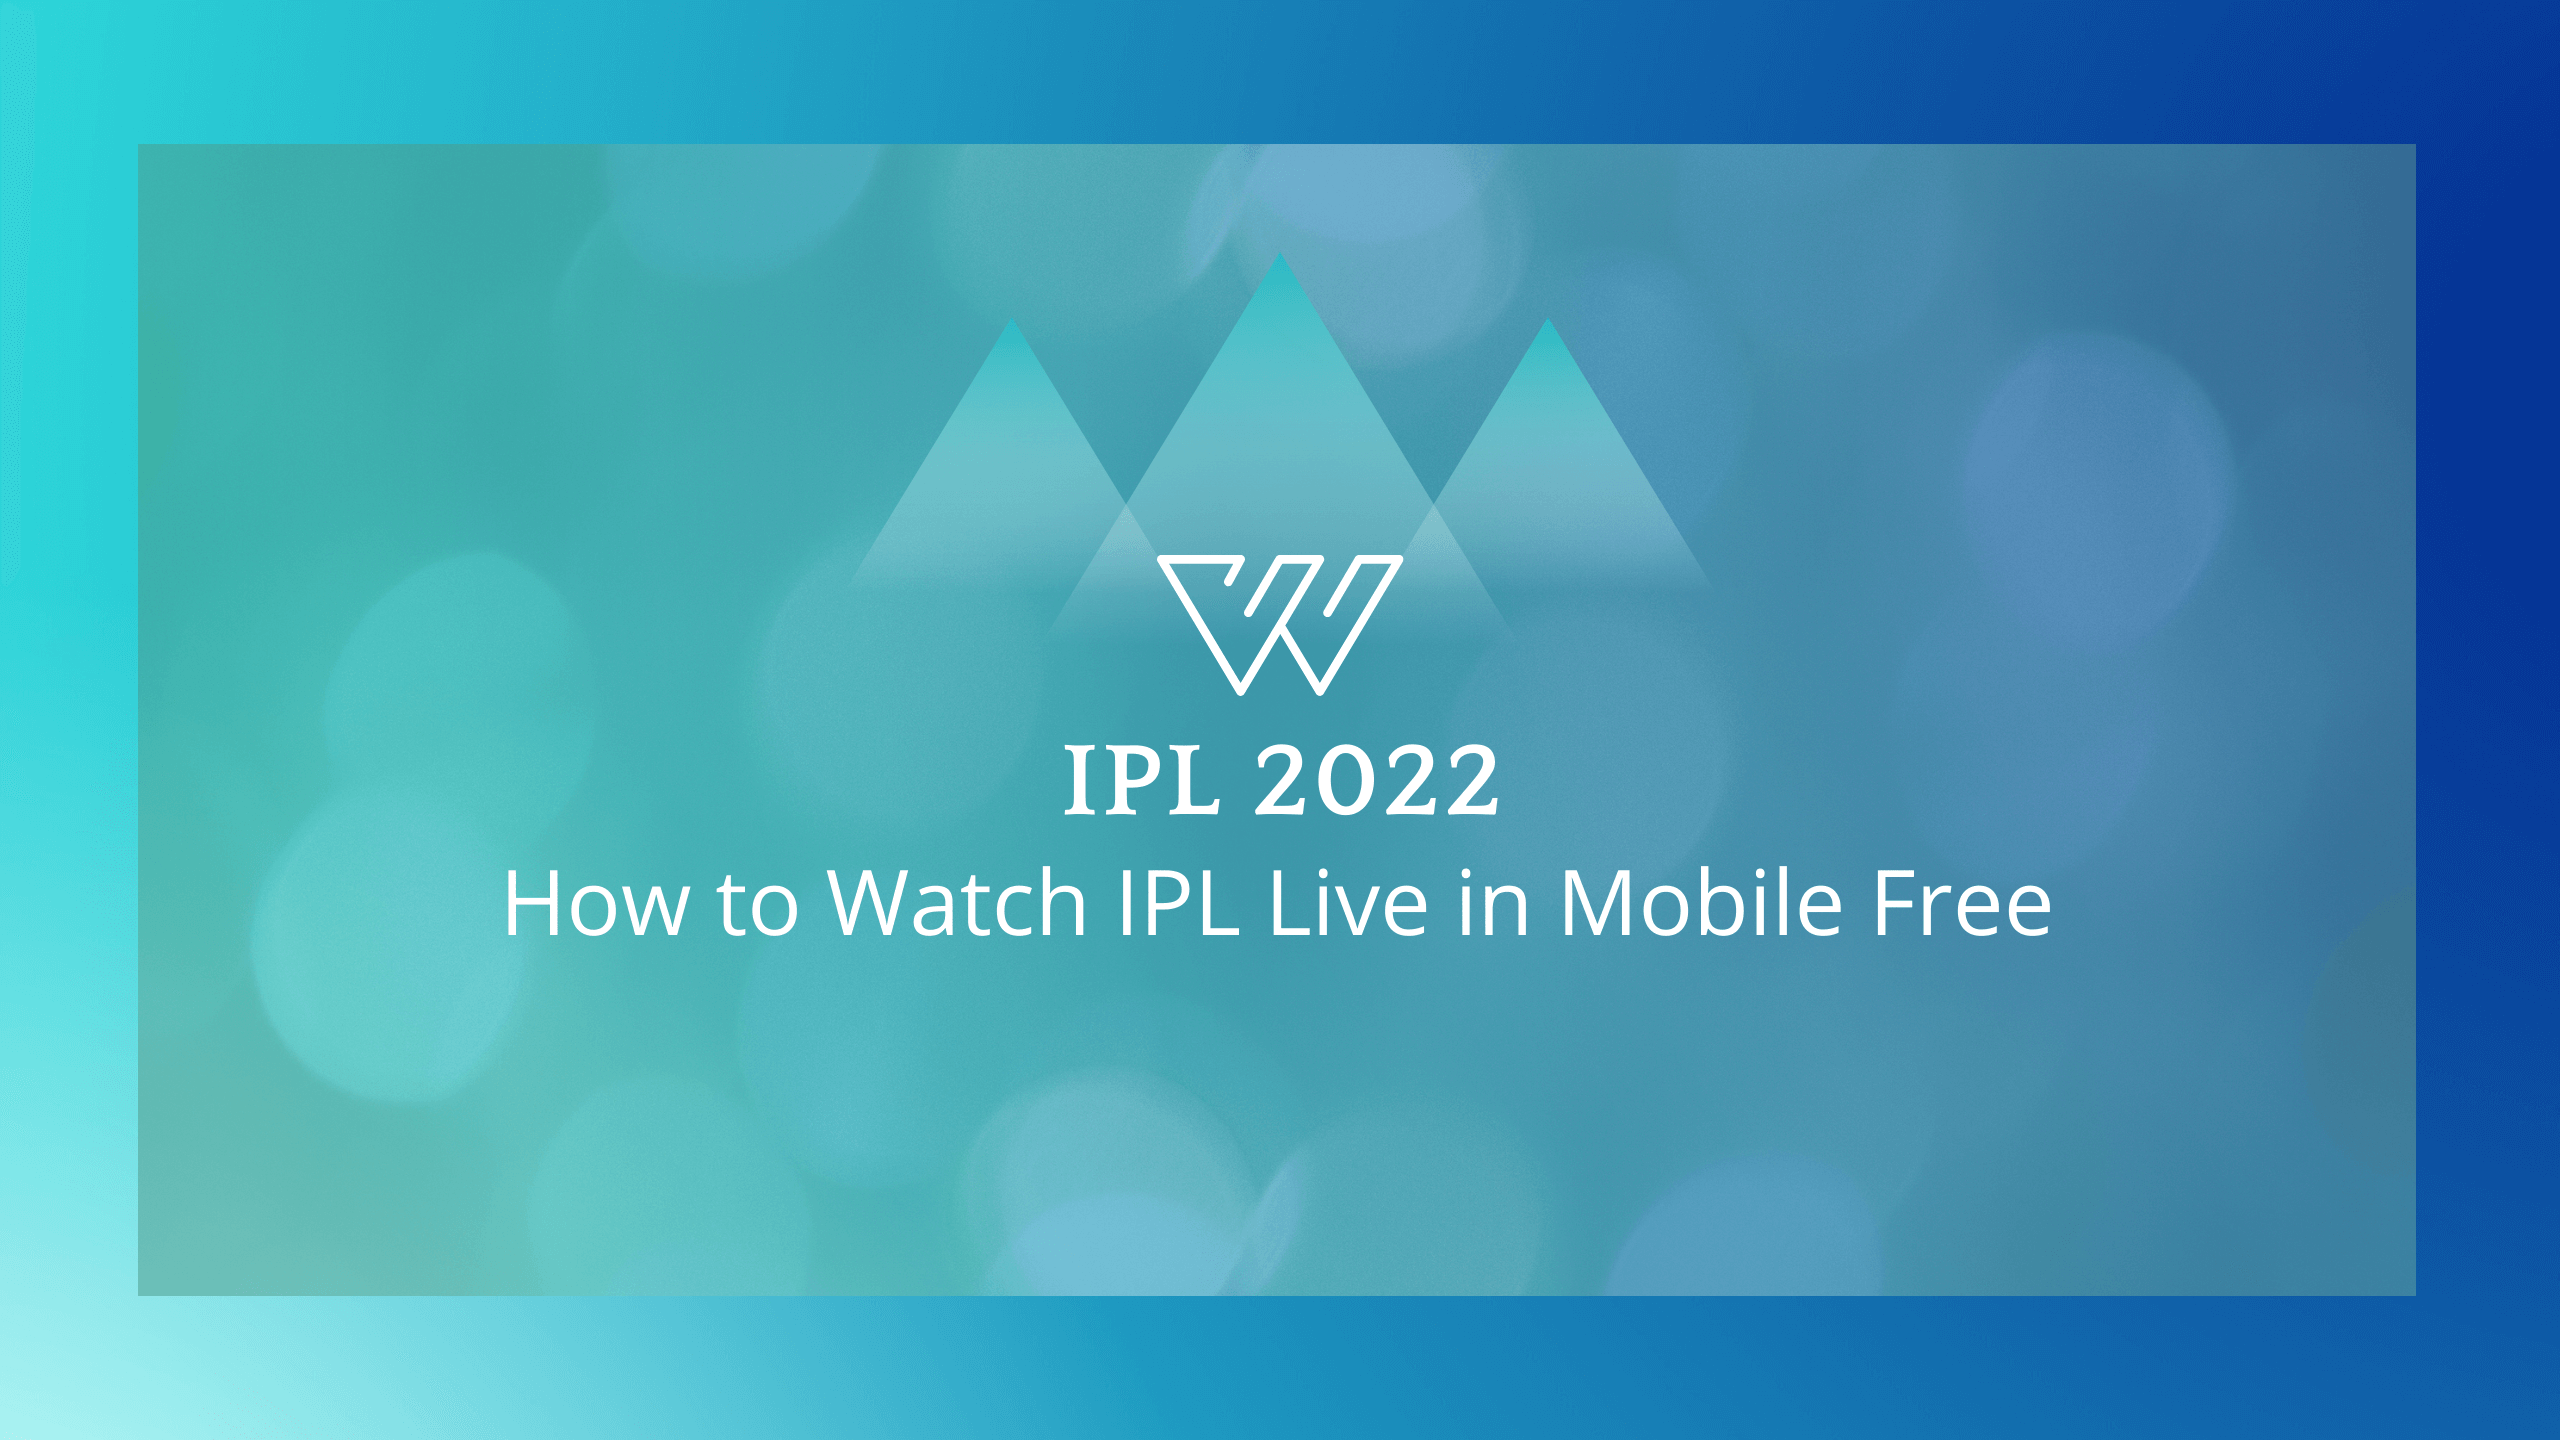 Best App for How to Watch IPL 2022 Live in Mobile for Free, Apps to Watch IPL Live Free Without Subscription